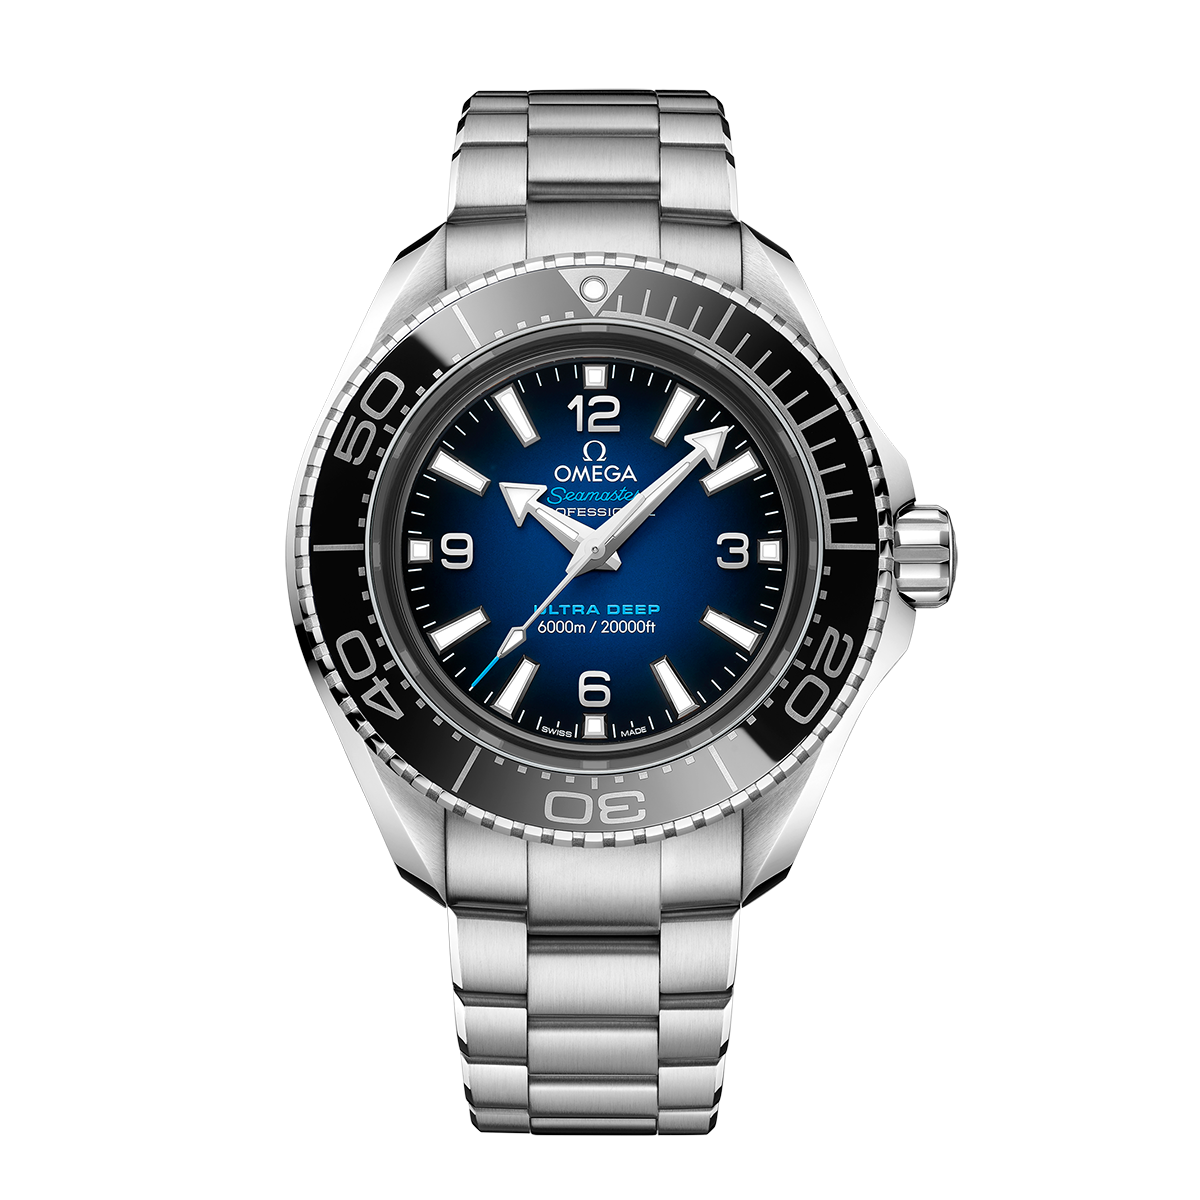 Seamaster Planet Ocean 600M Co-Axial Master Chronometer 45.5 mm Ultra Deep